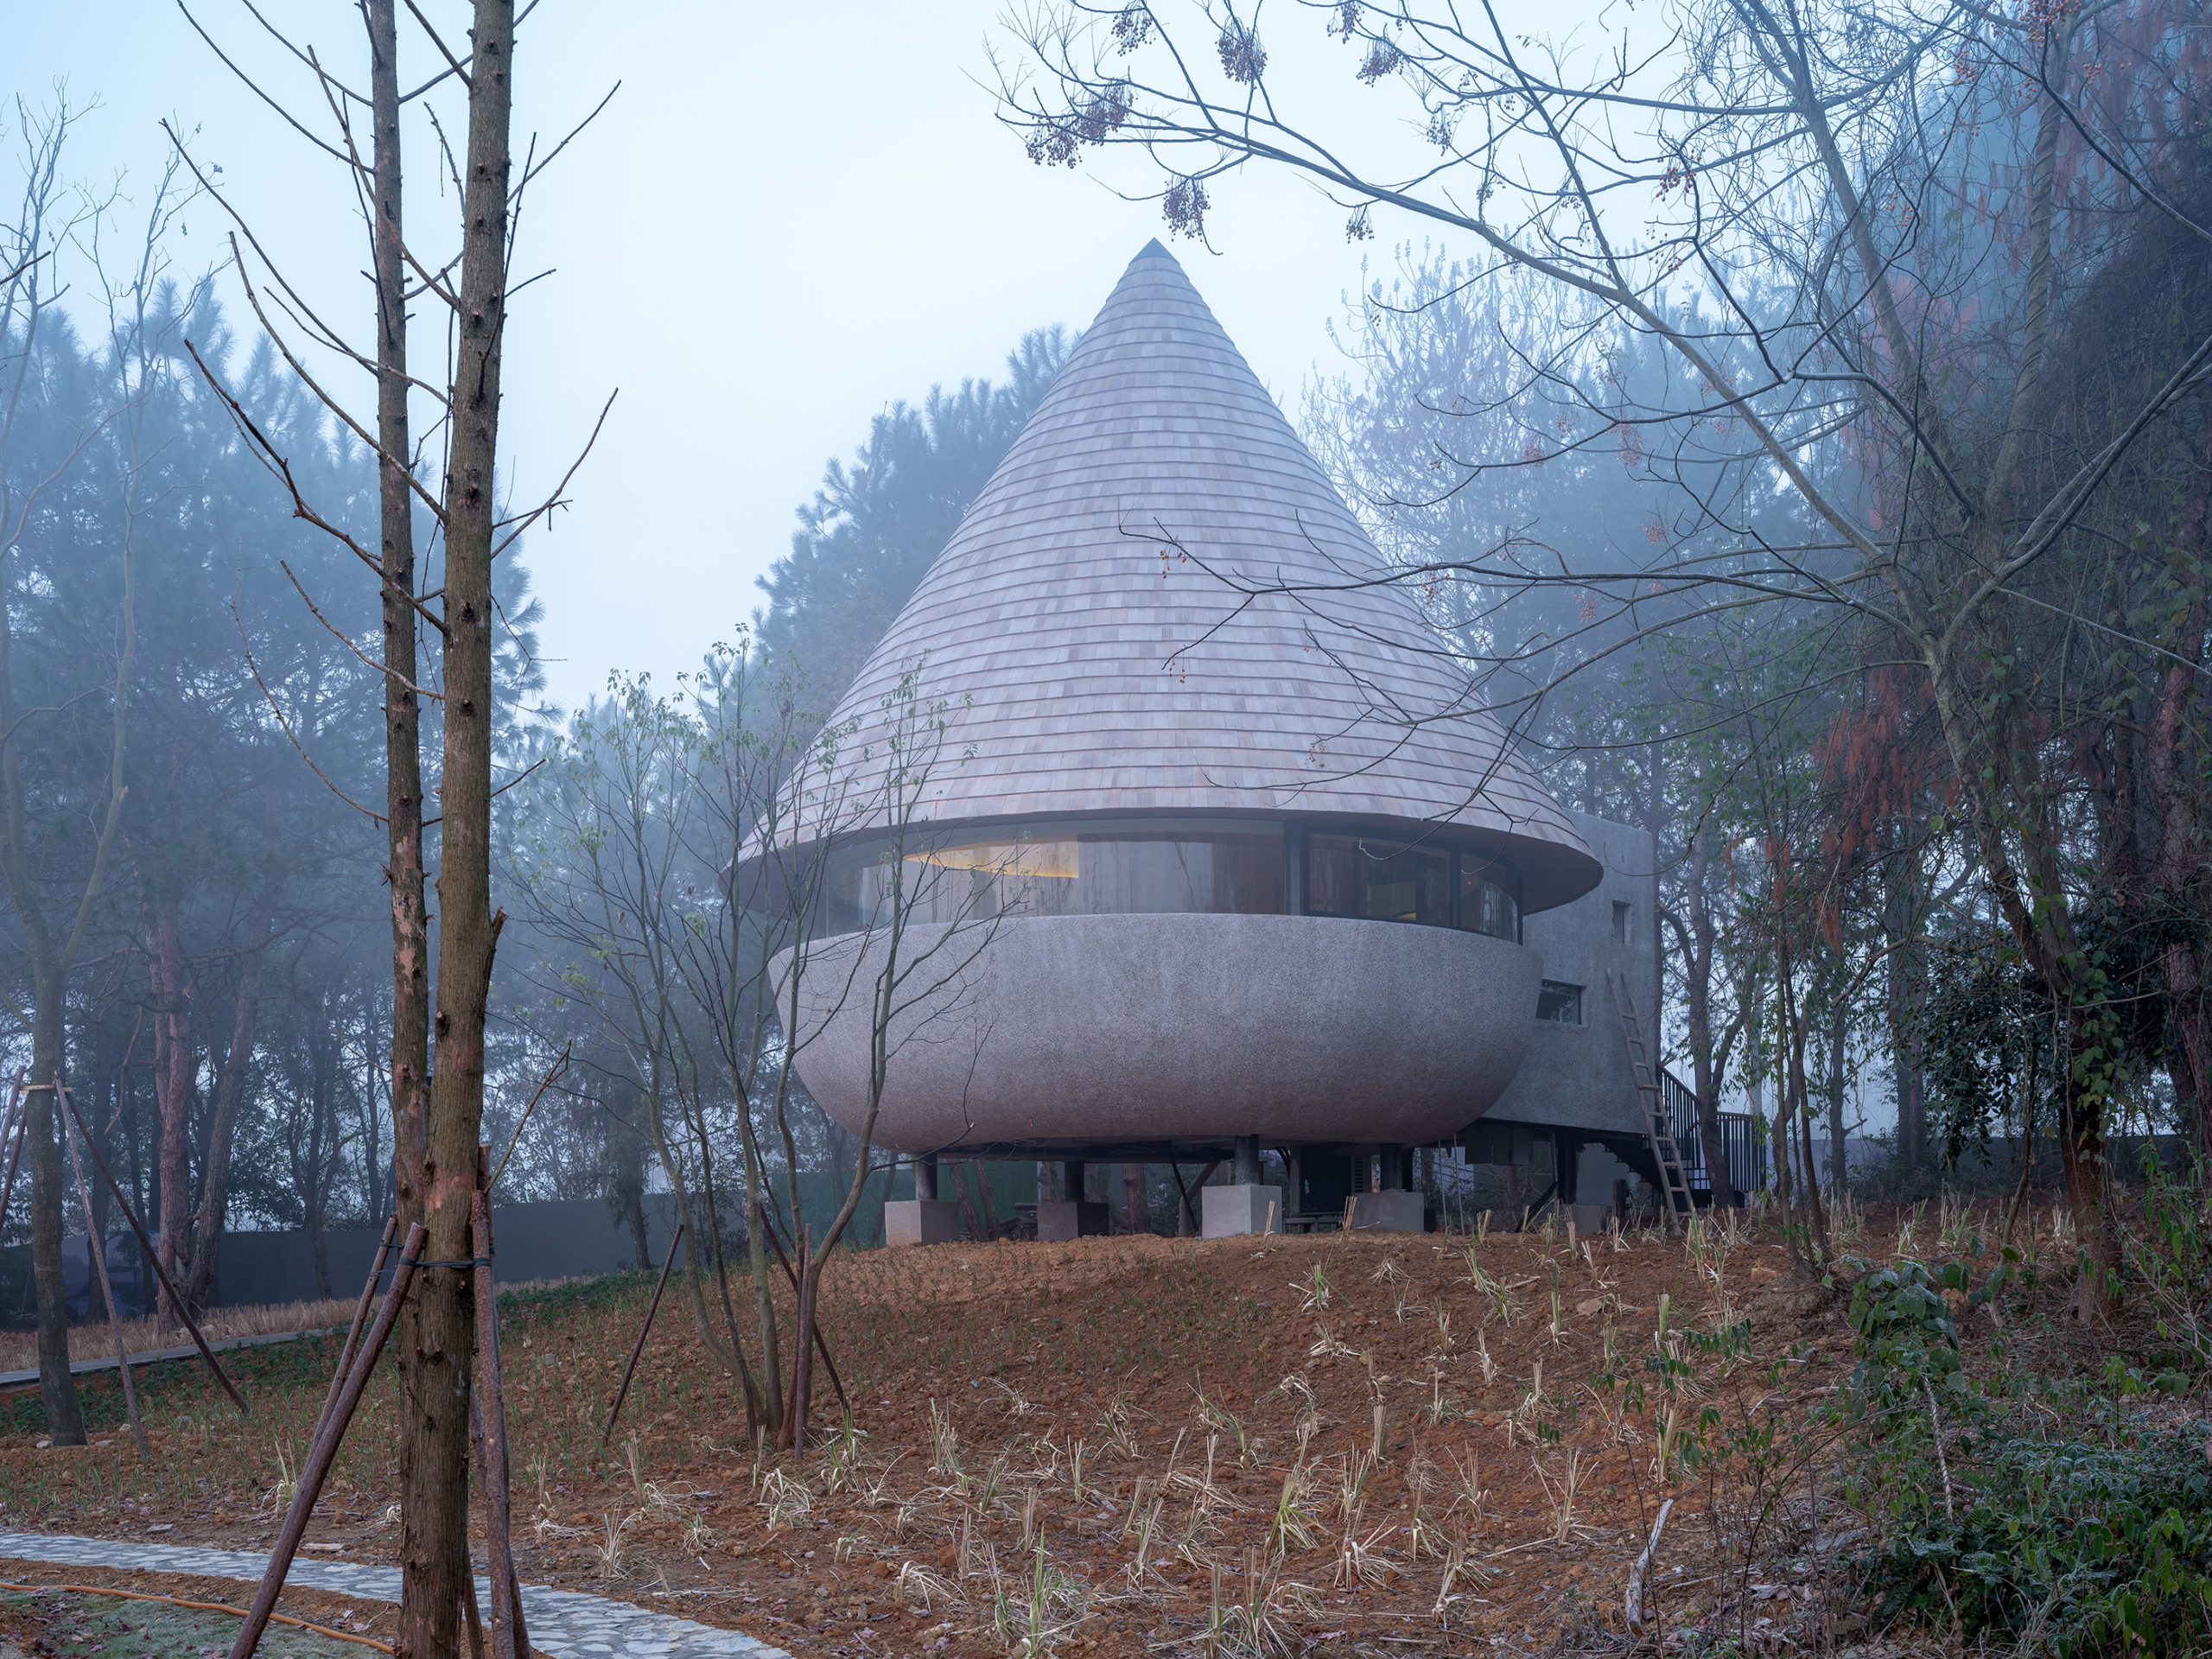 organic architecture The Mushroom - A Wood House in the Forest by ZJJZ Atelier, China